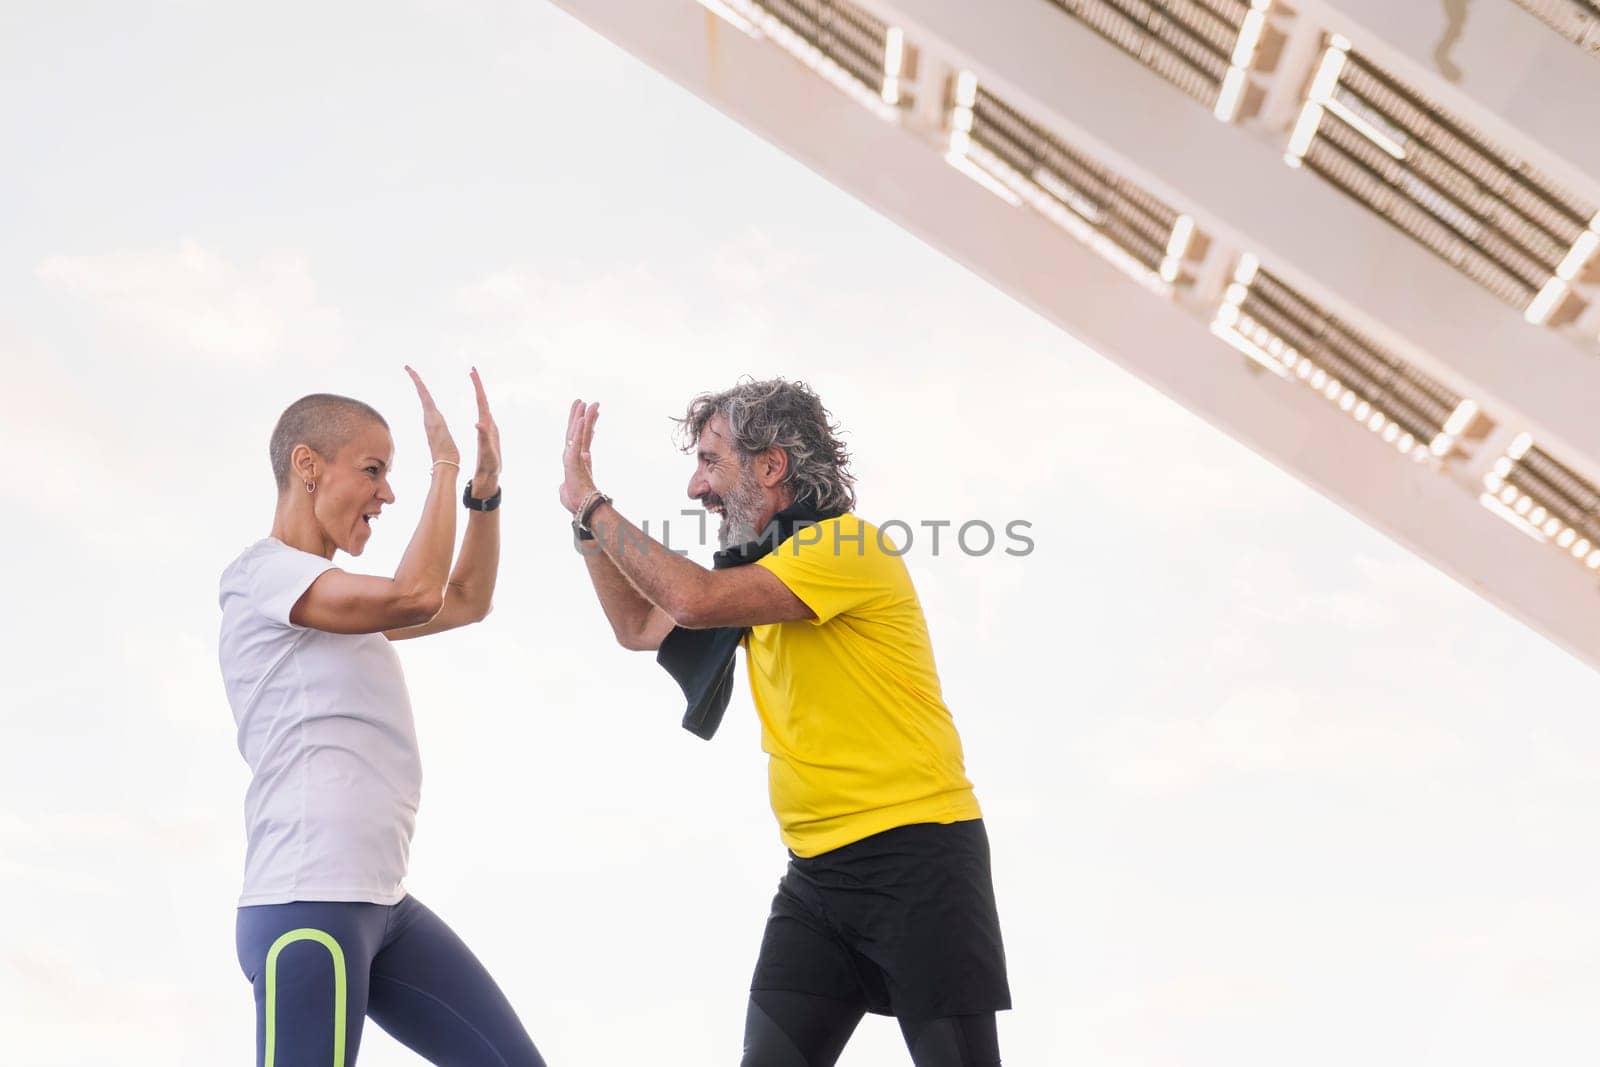 senior sports man and his personal trainer smiling happily high five with joy after a training session, concept of active and healthy lifestyle in the middle age, copy space for text